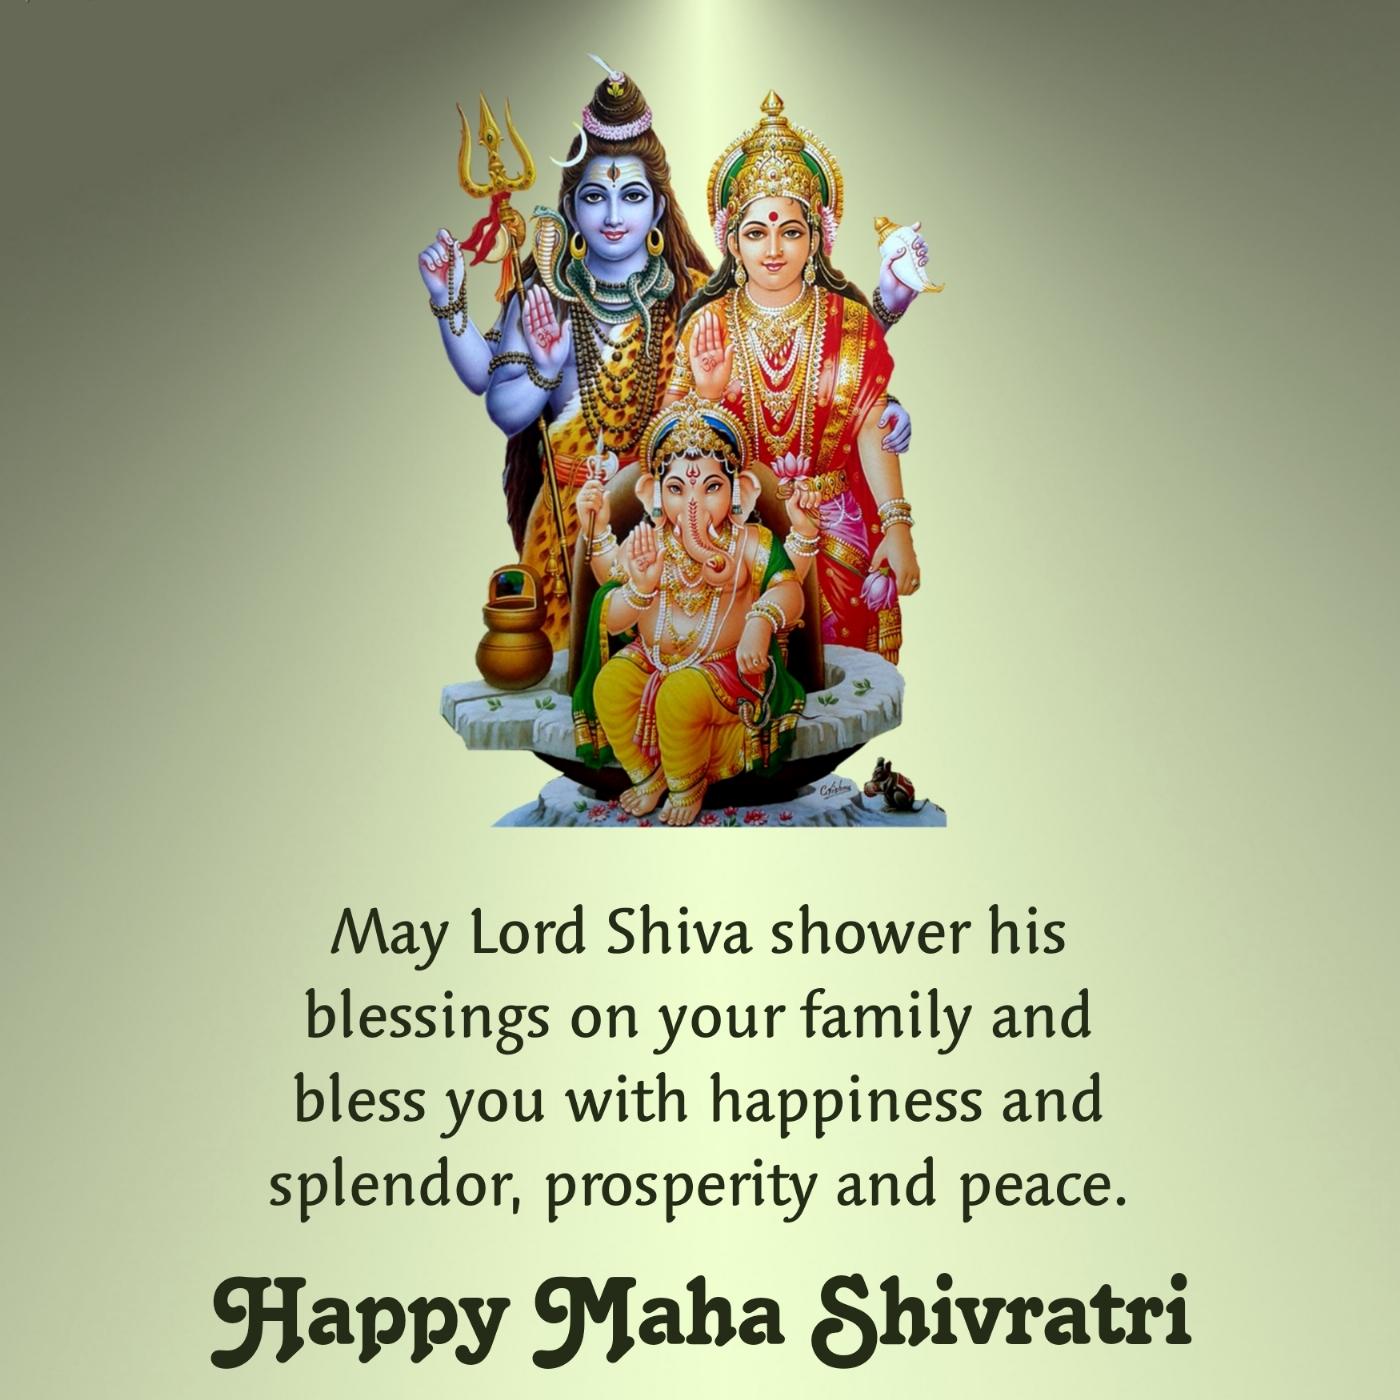 May Lord Shiva shower his blessings on your family